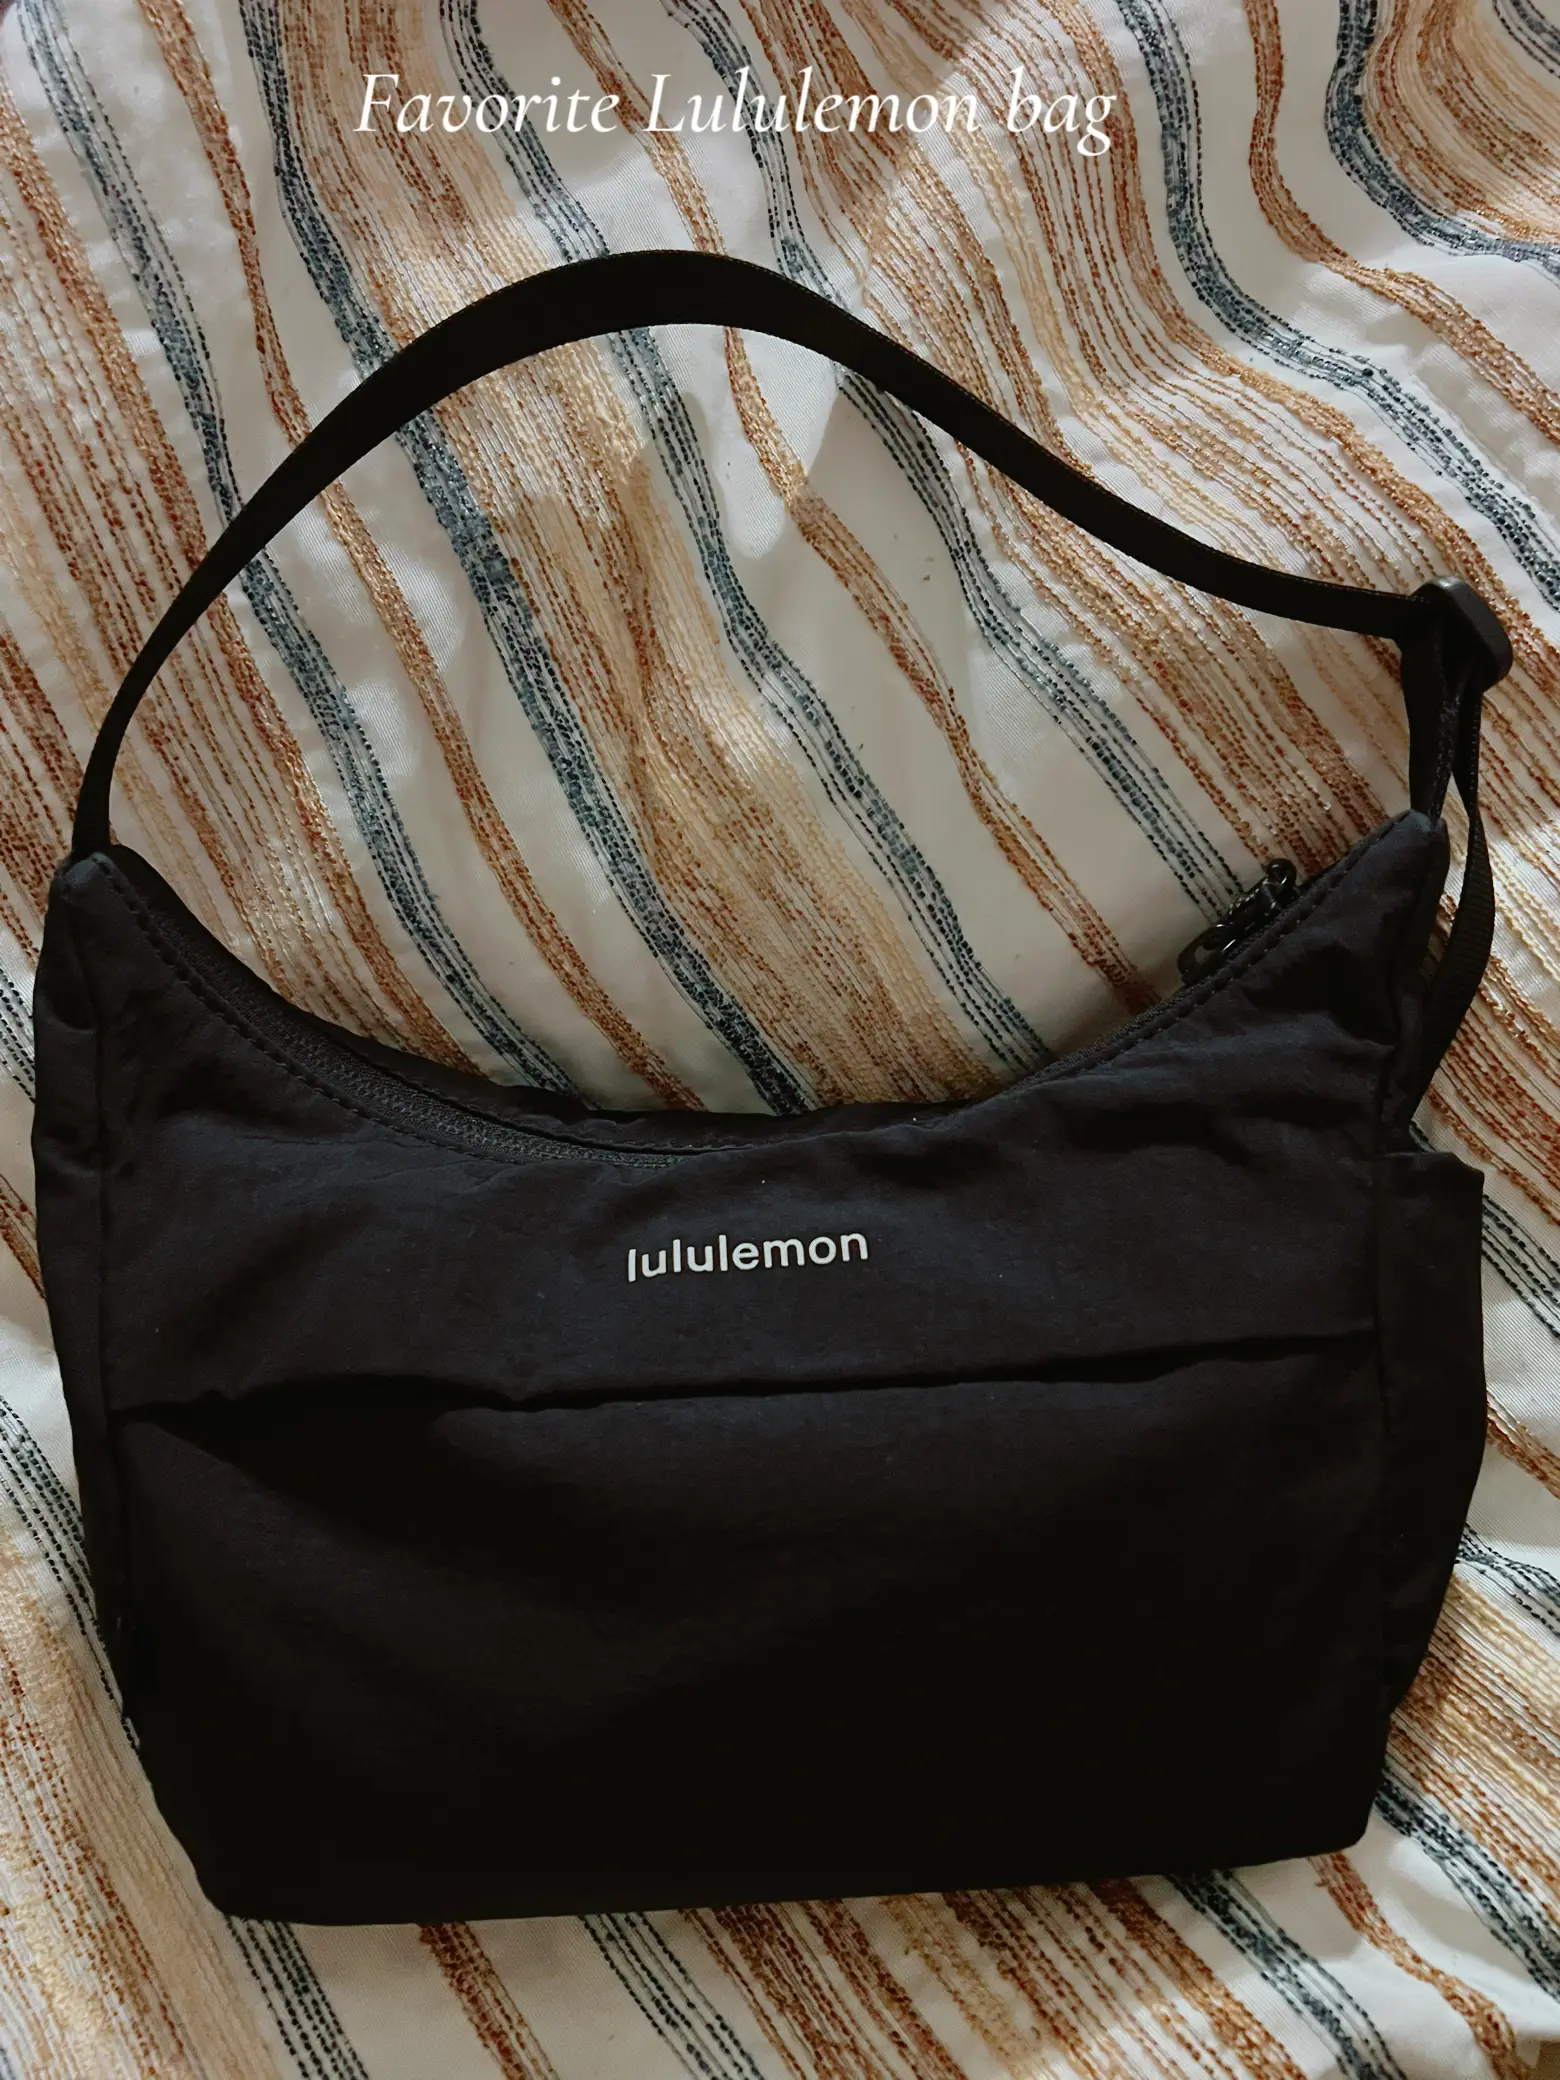 can someone with an extended strap bag please help me @lululemon